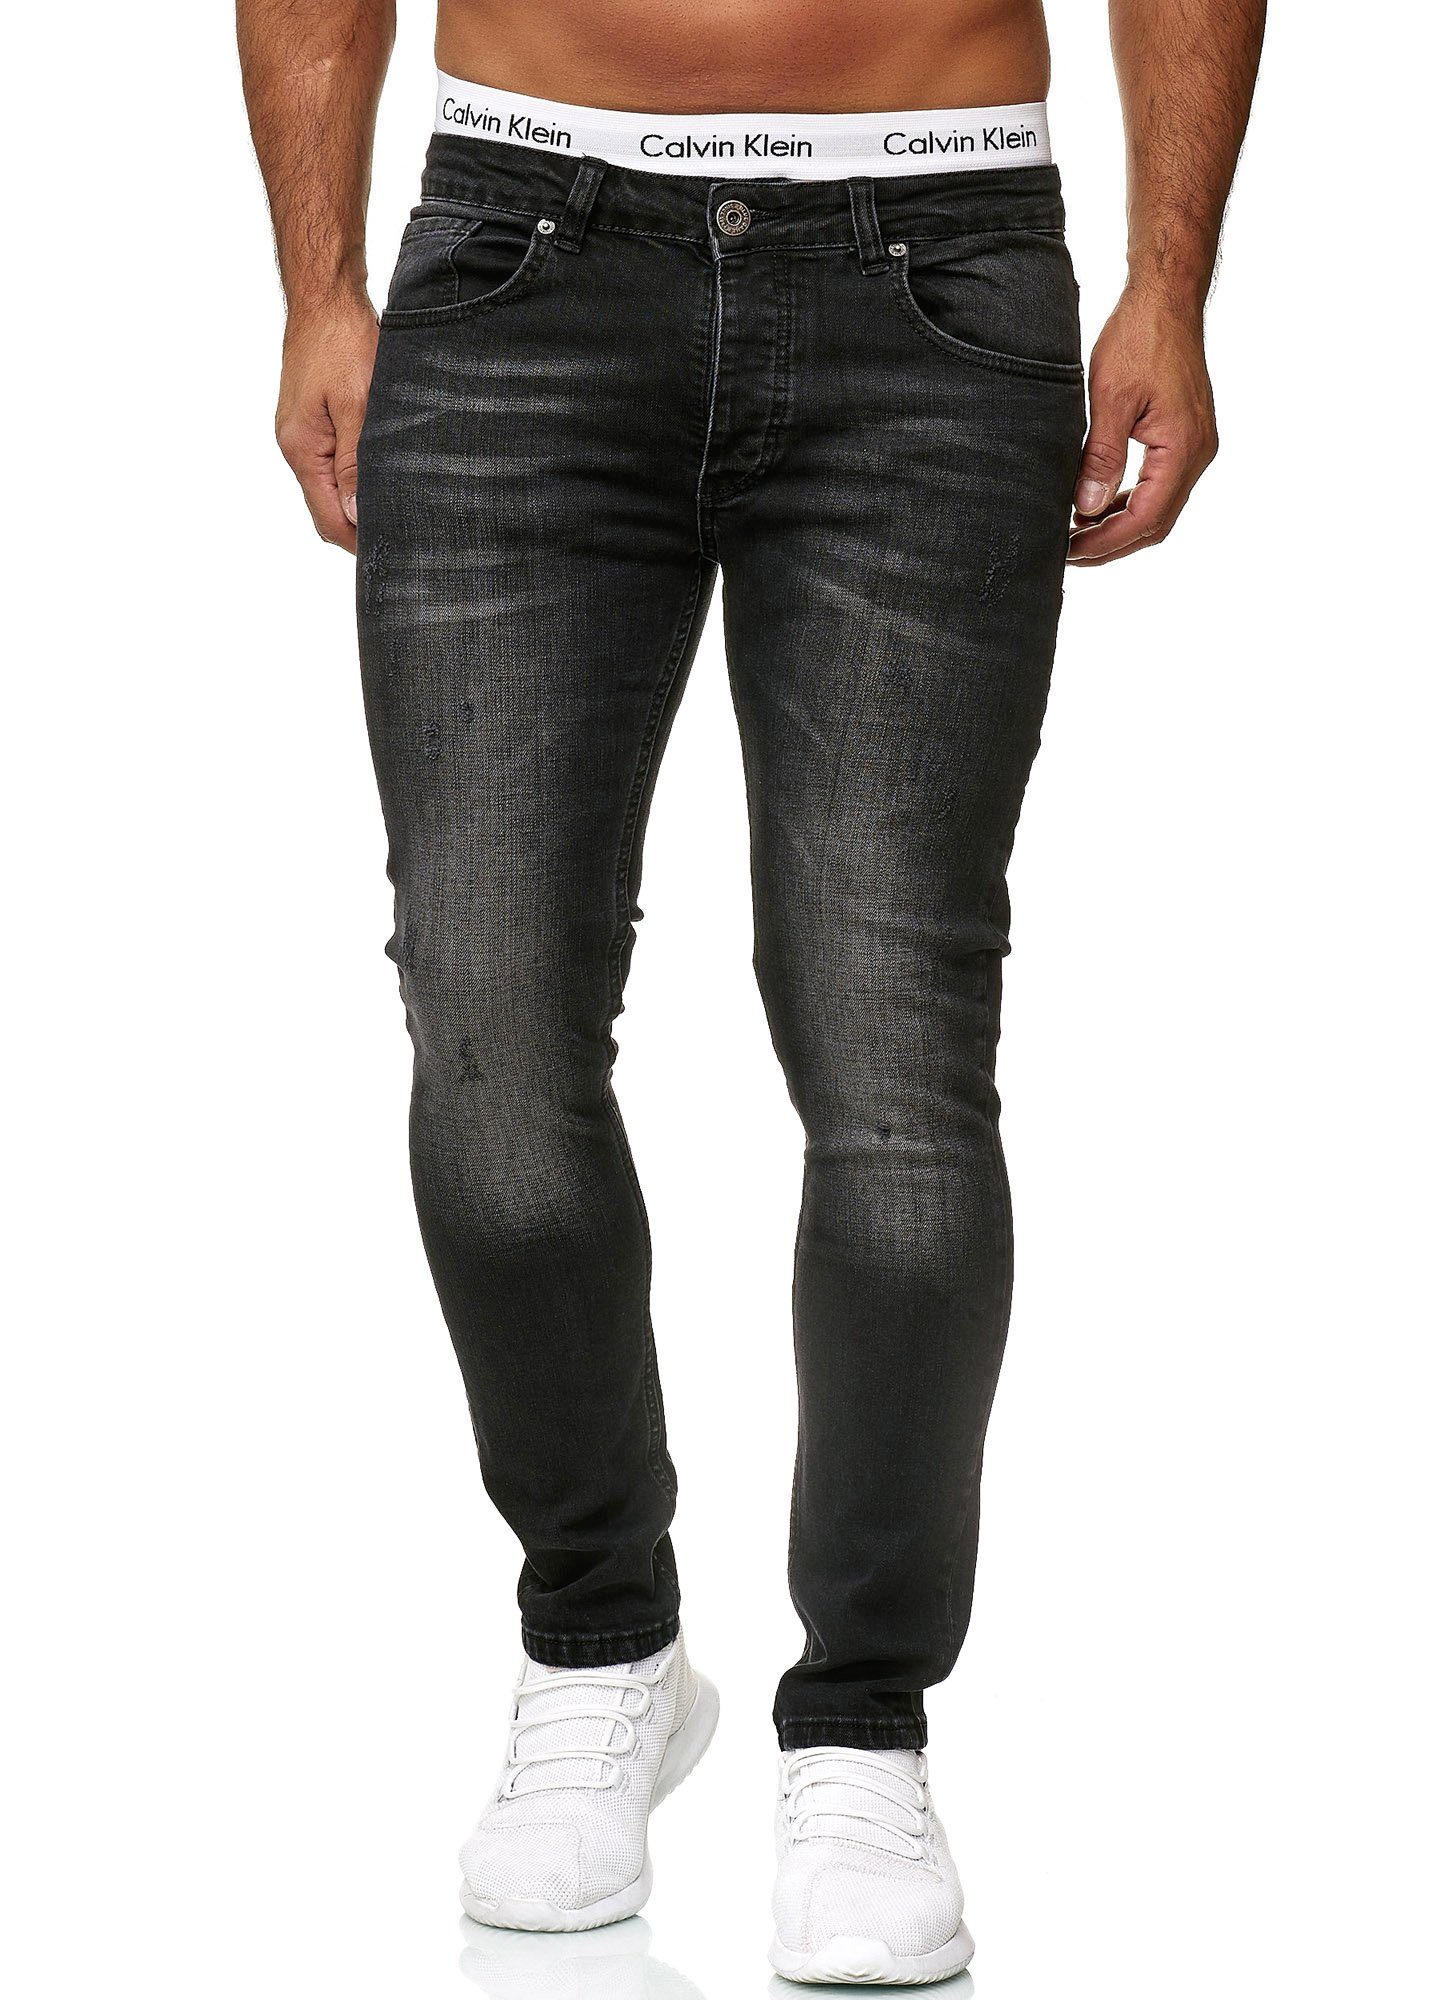 OneRedox Straight-Jeans 600JS (Jeanshose Designerjeans Black Freizeit Bootcut, 604 Dirty Casual Used Business 1-tlg)